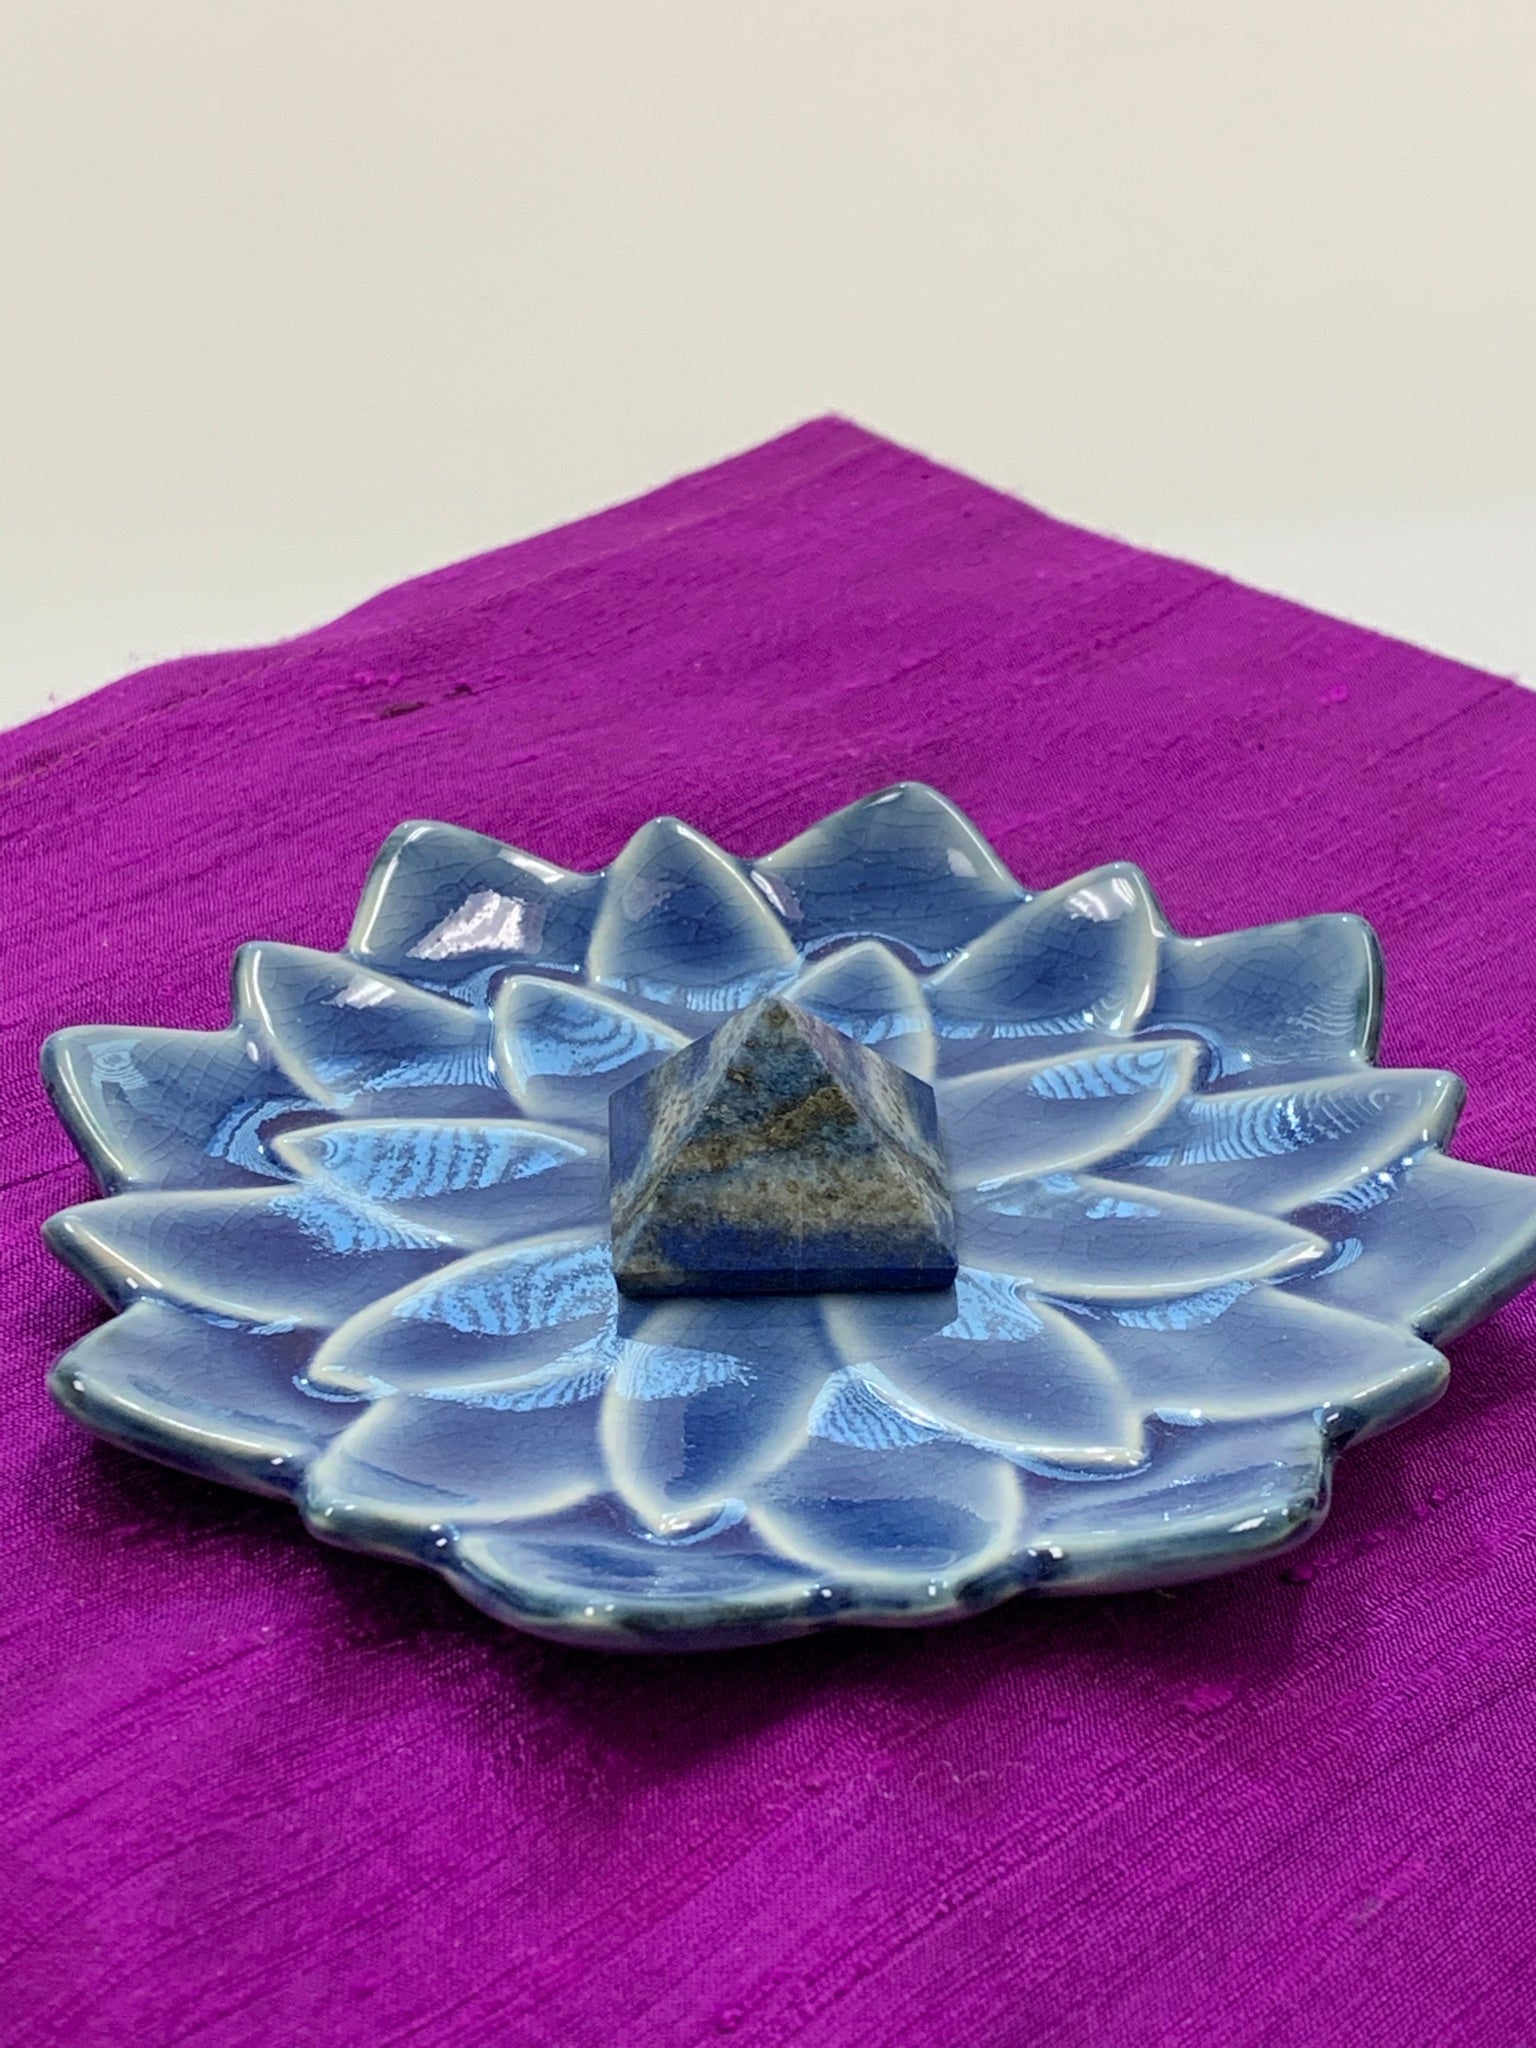 Powerful lapis pyramid is perfect for your altar, meditation space or anywhere in your home or office. Lapis enhances intuition and psychic abilities, brings peace and serenity, reveals inner truths, aids in self-expression, activates the third eye and and brings balance to the throat chakra. Pyramids are used to amplify and transform energy. Today "their likeness is used to charge crystals, herbs, pendulums, water, essential oils and other items. Approximately 1"x1".